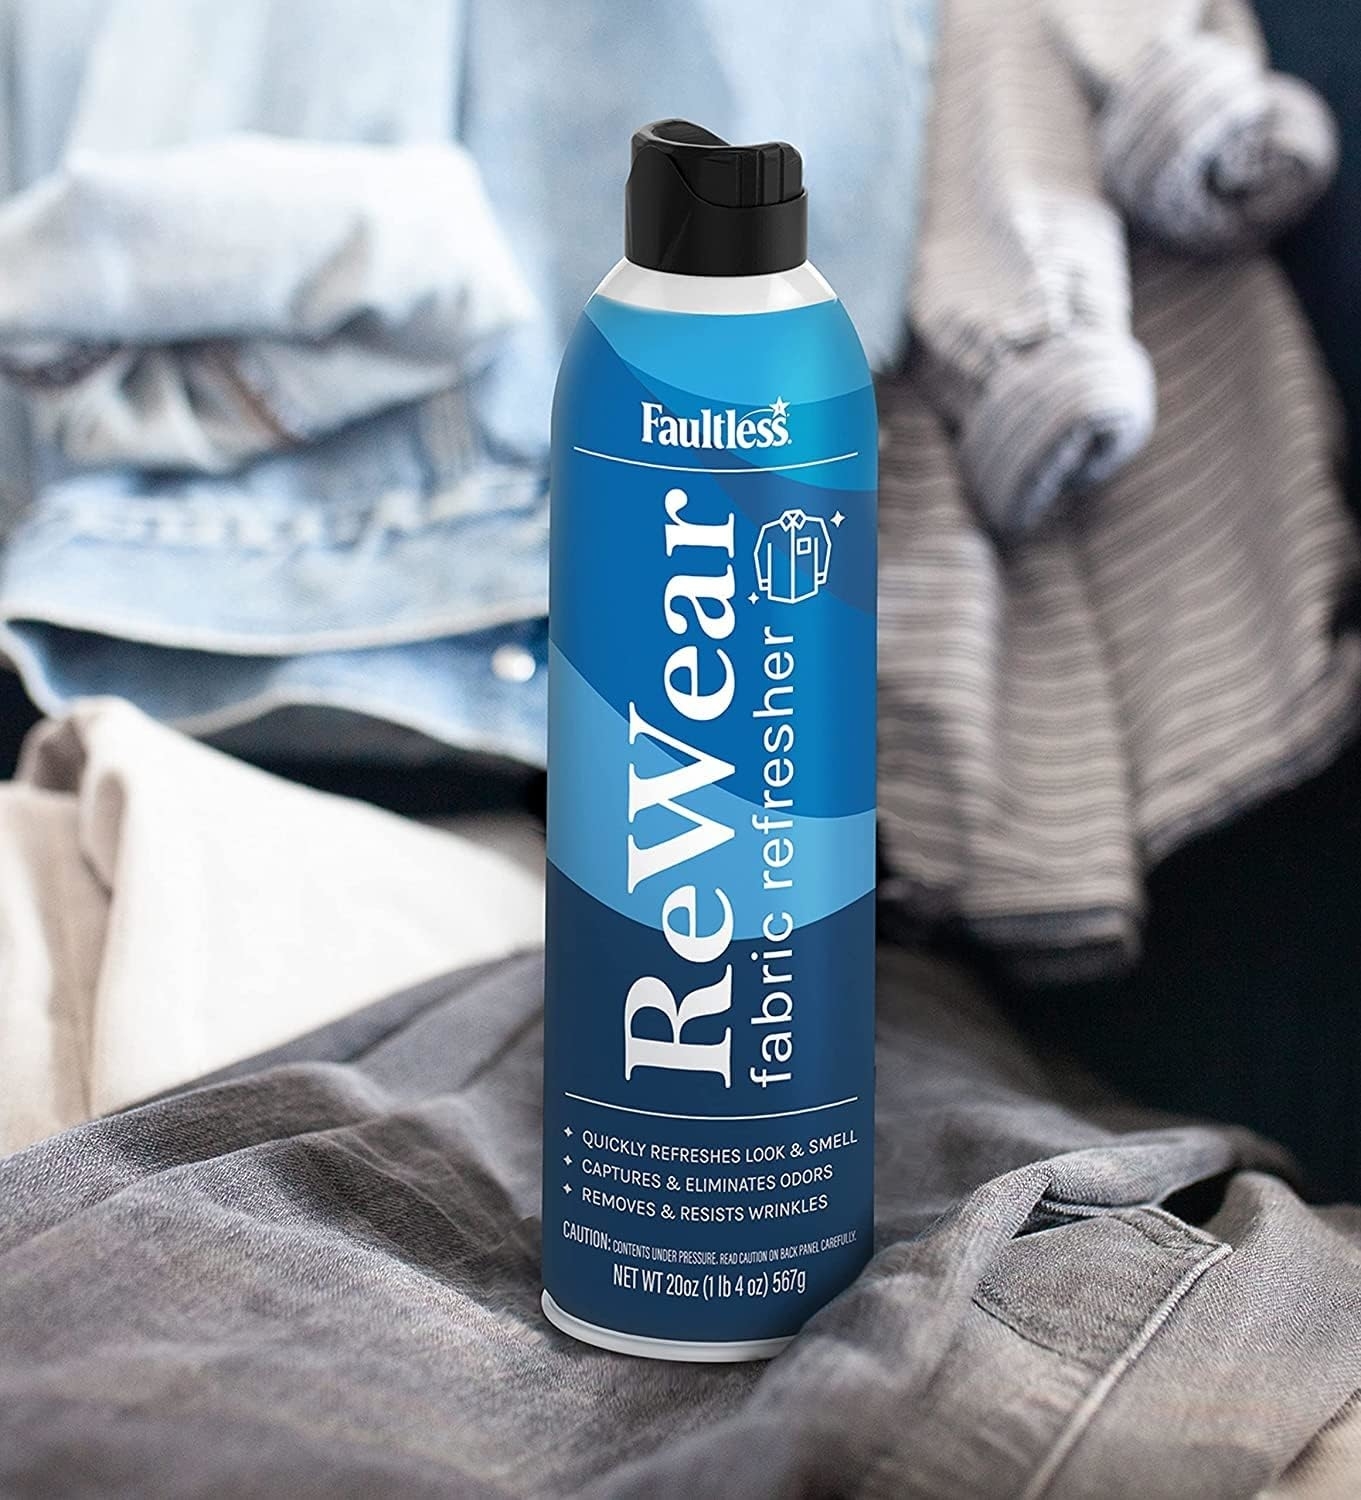 Faultless ReWear fabric refresher spray can positioned in front of casually folded garments